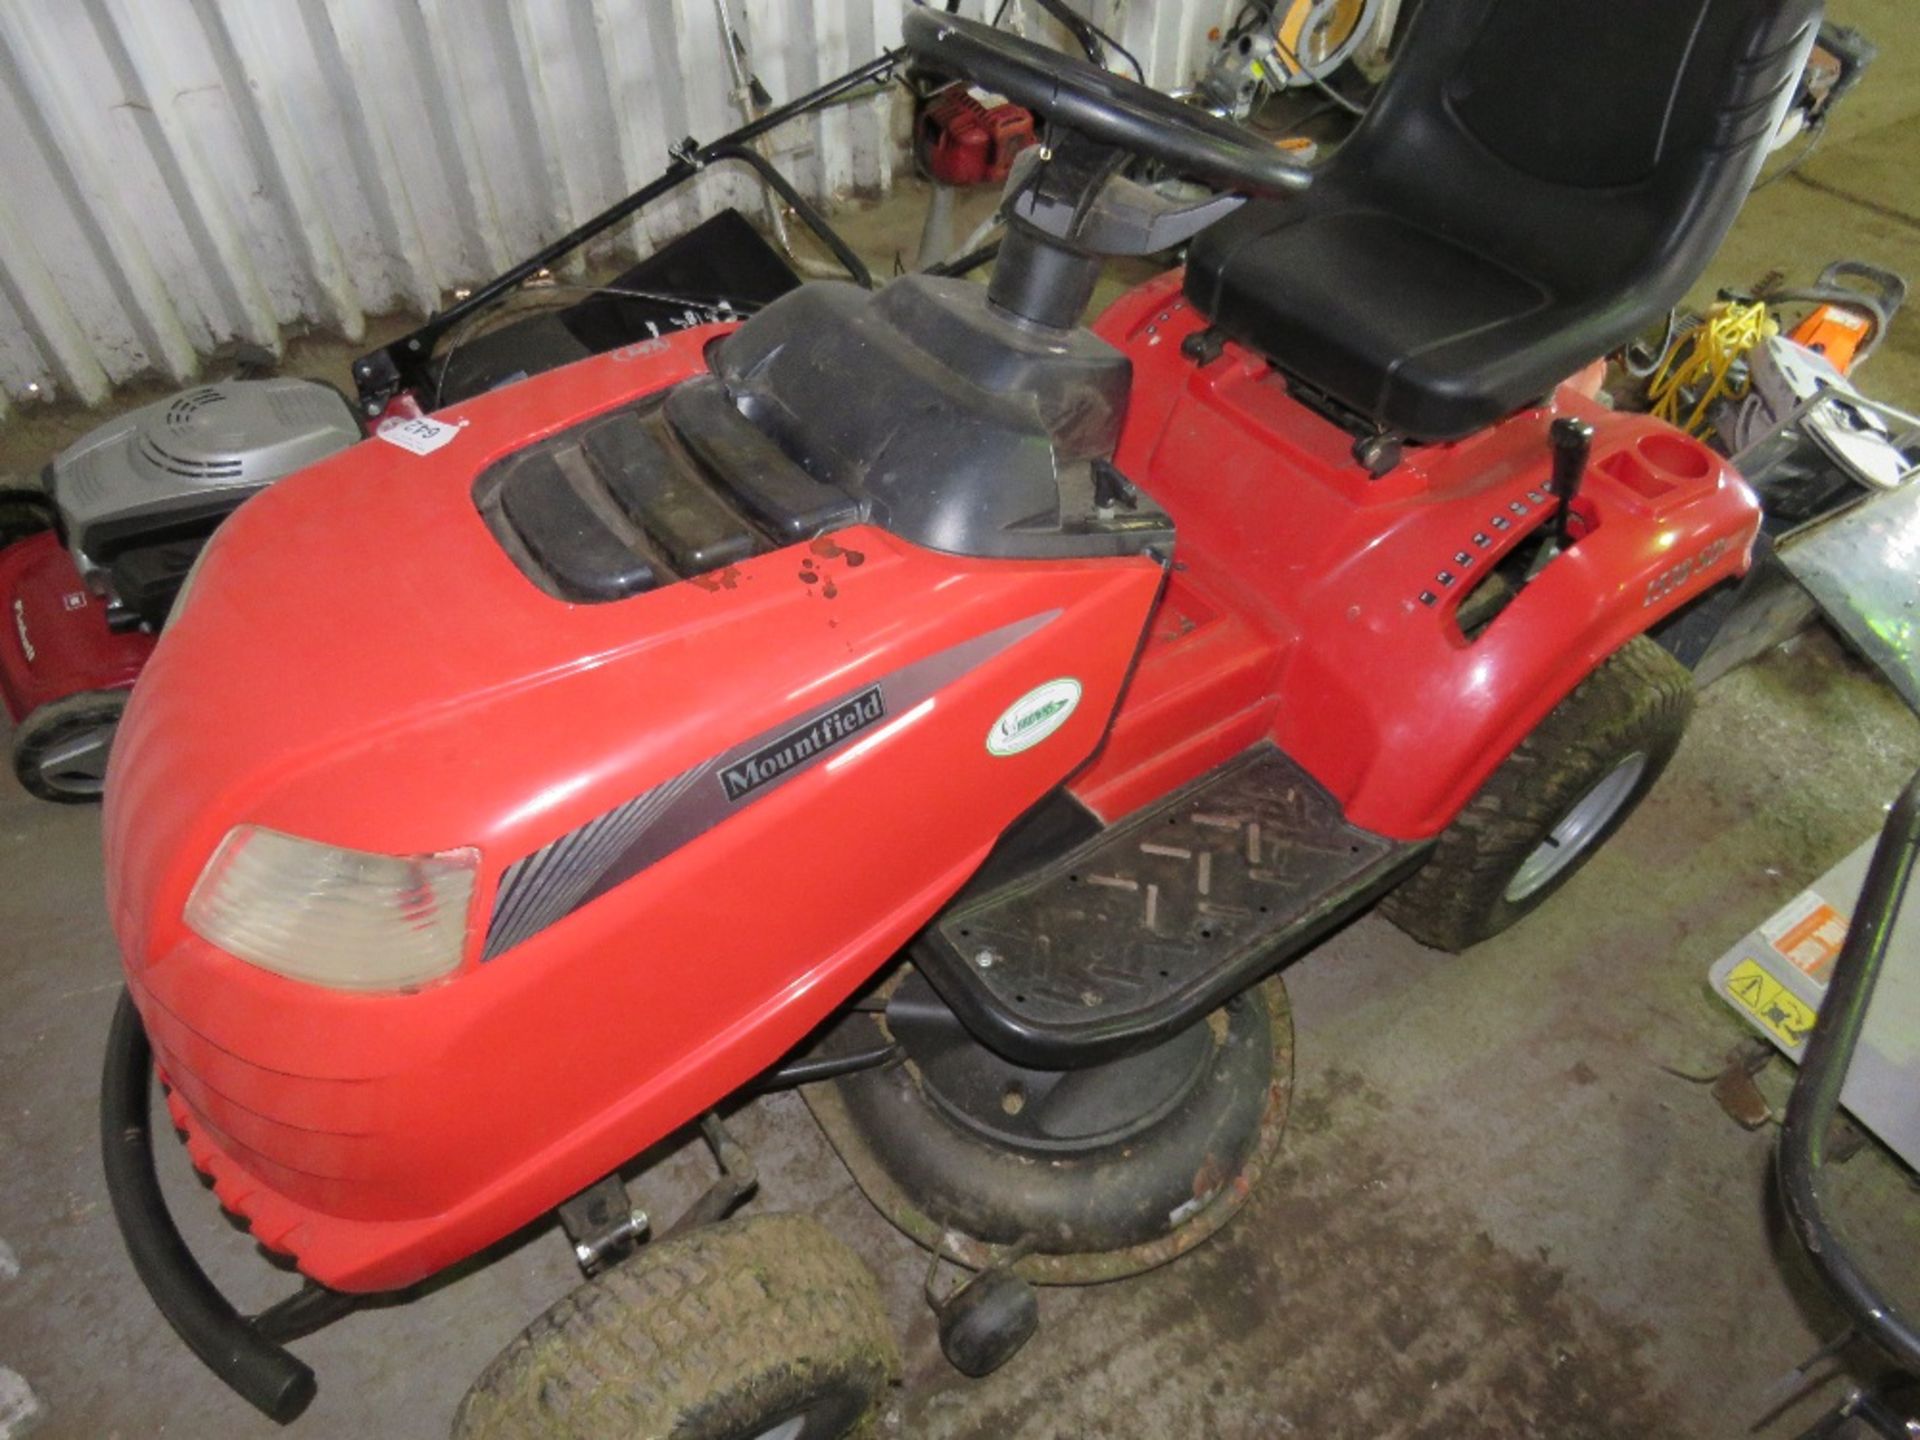 MOUNTFIELD 1538SD RIDE ON MOWER, YEAR 2012, HYDRASTATIC DRIVE. WHEN TESTED WAS SEEN TO RUN BUT WOULD